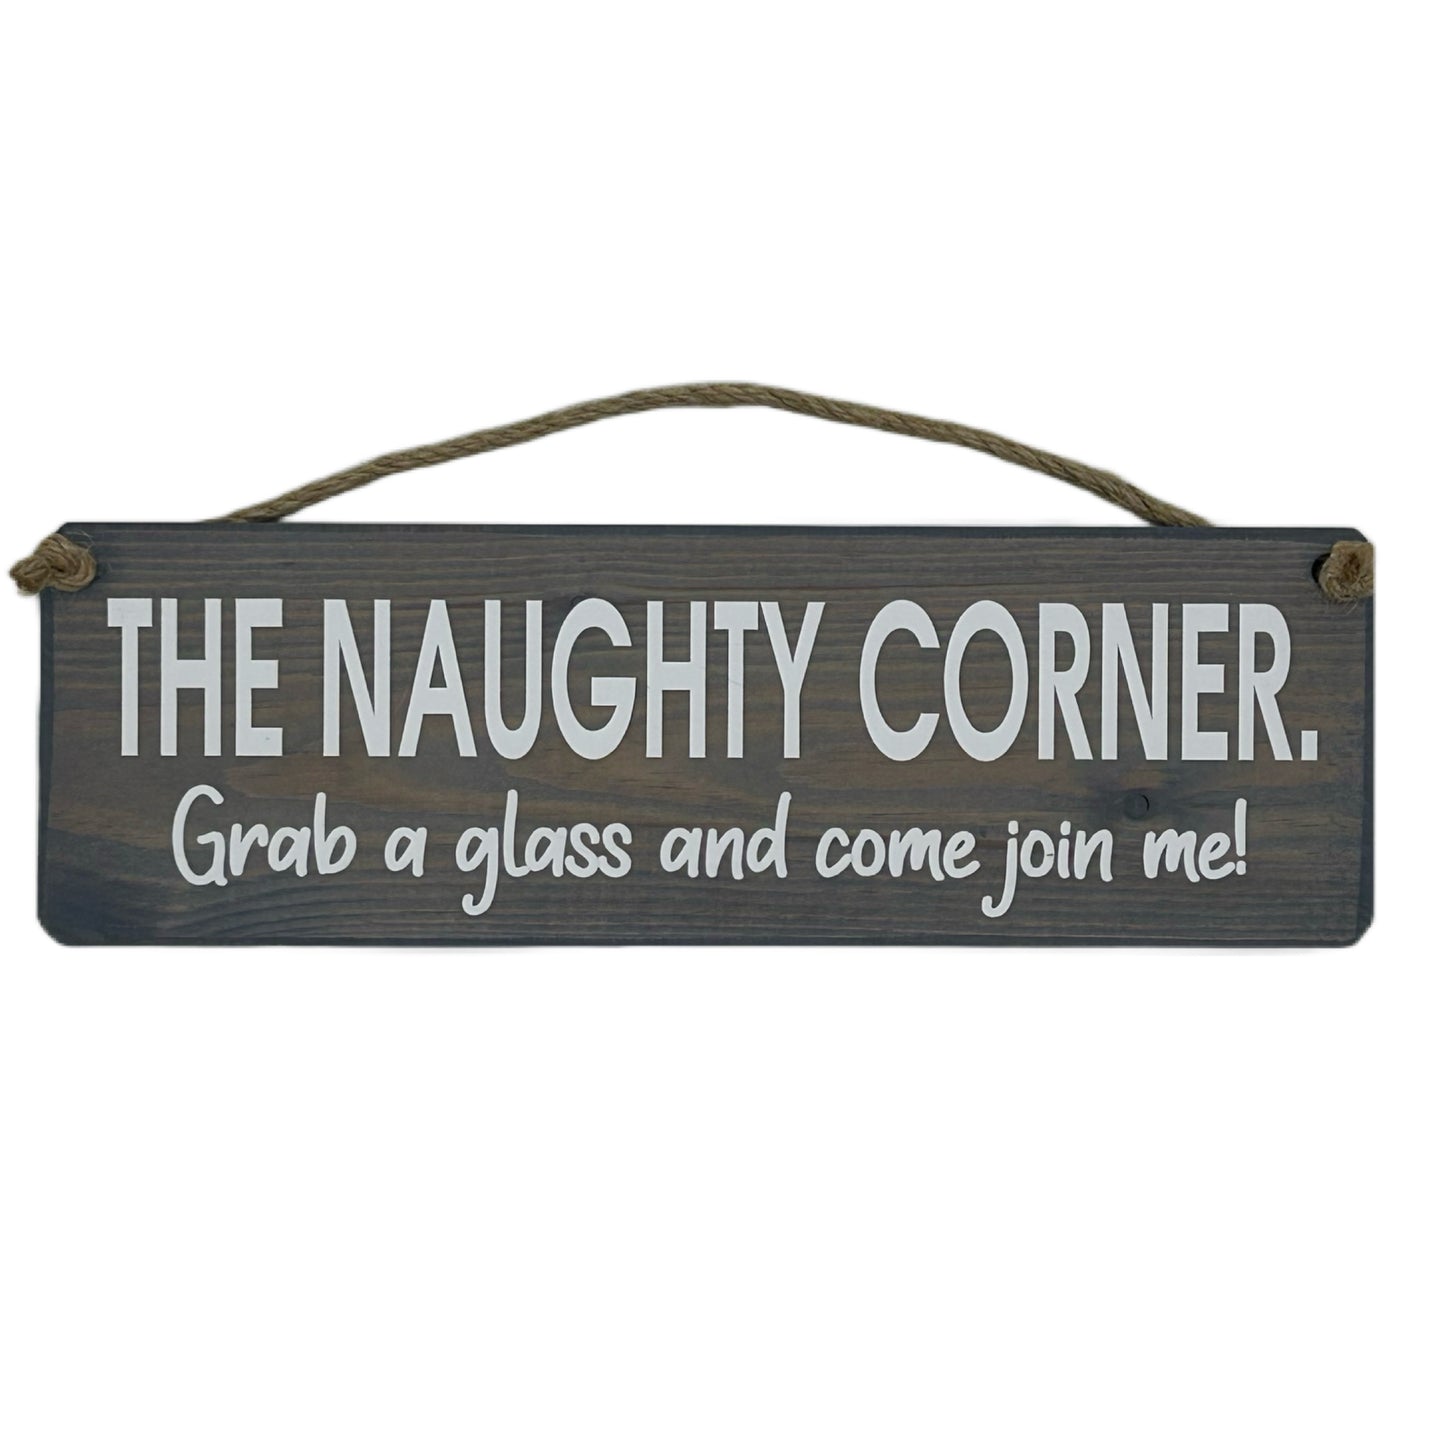 The Naughty Corner. Grab a glass and join me!